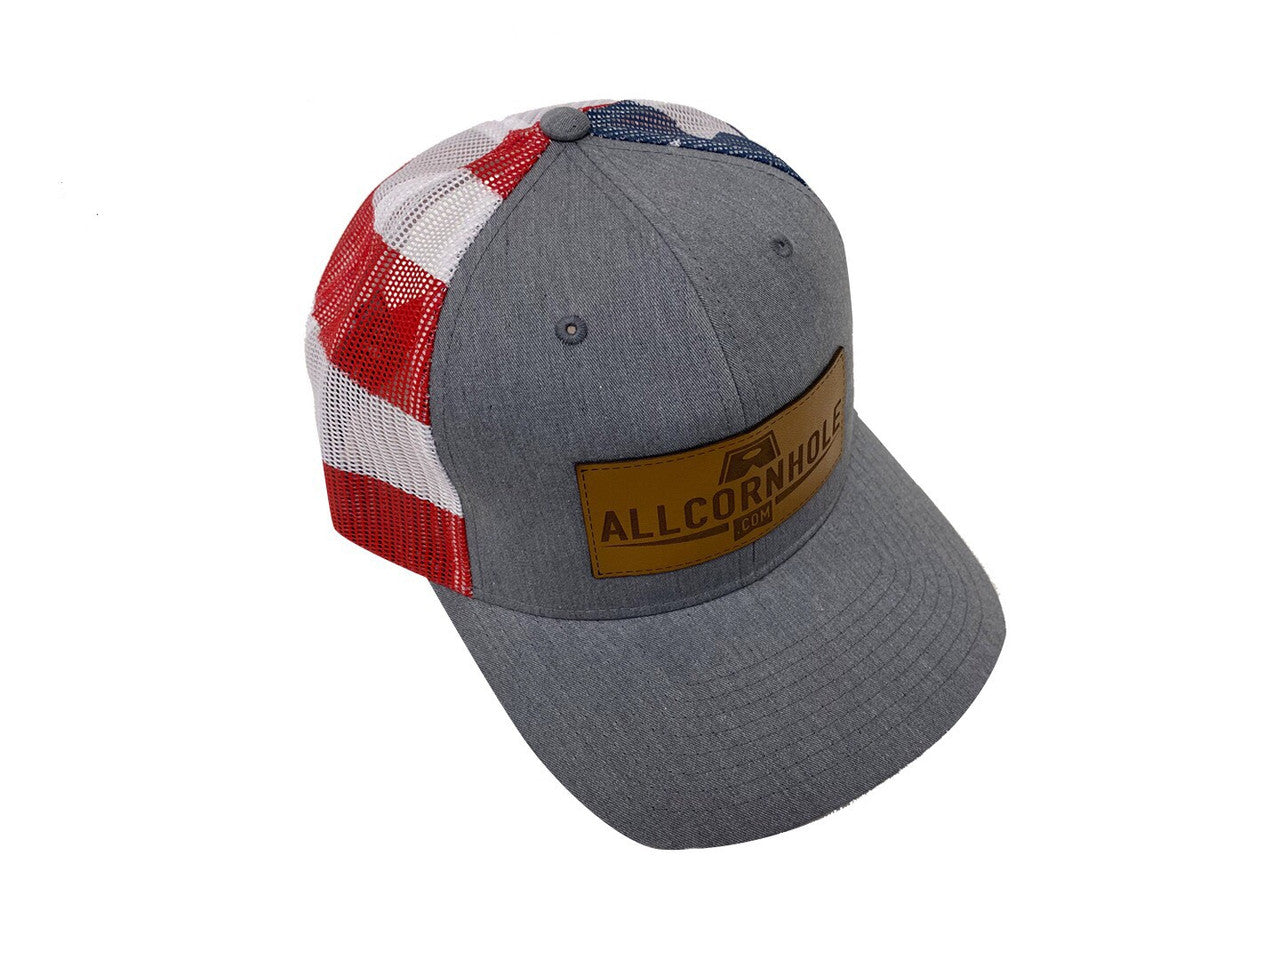 AllCornhole Curved Bill Stars/Stripes Snapback Hat with Leather patch - Free Shipping